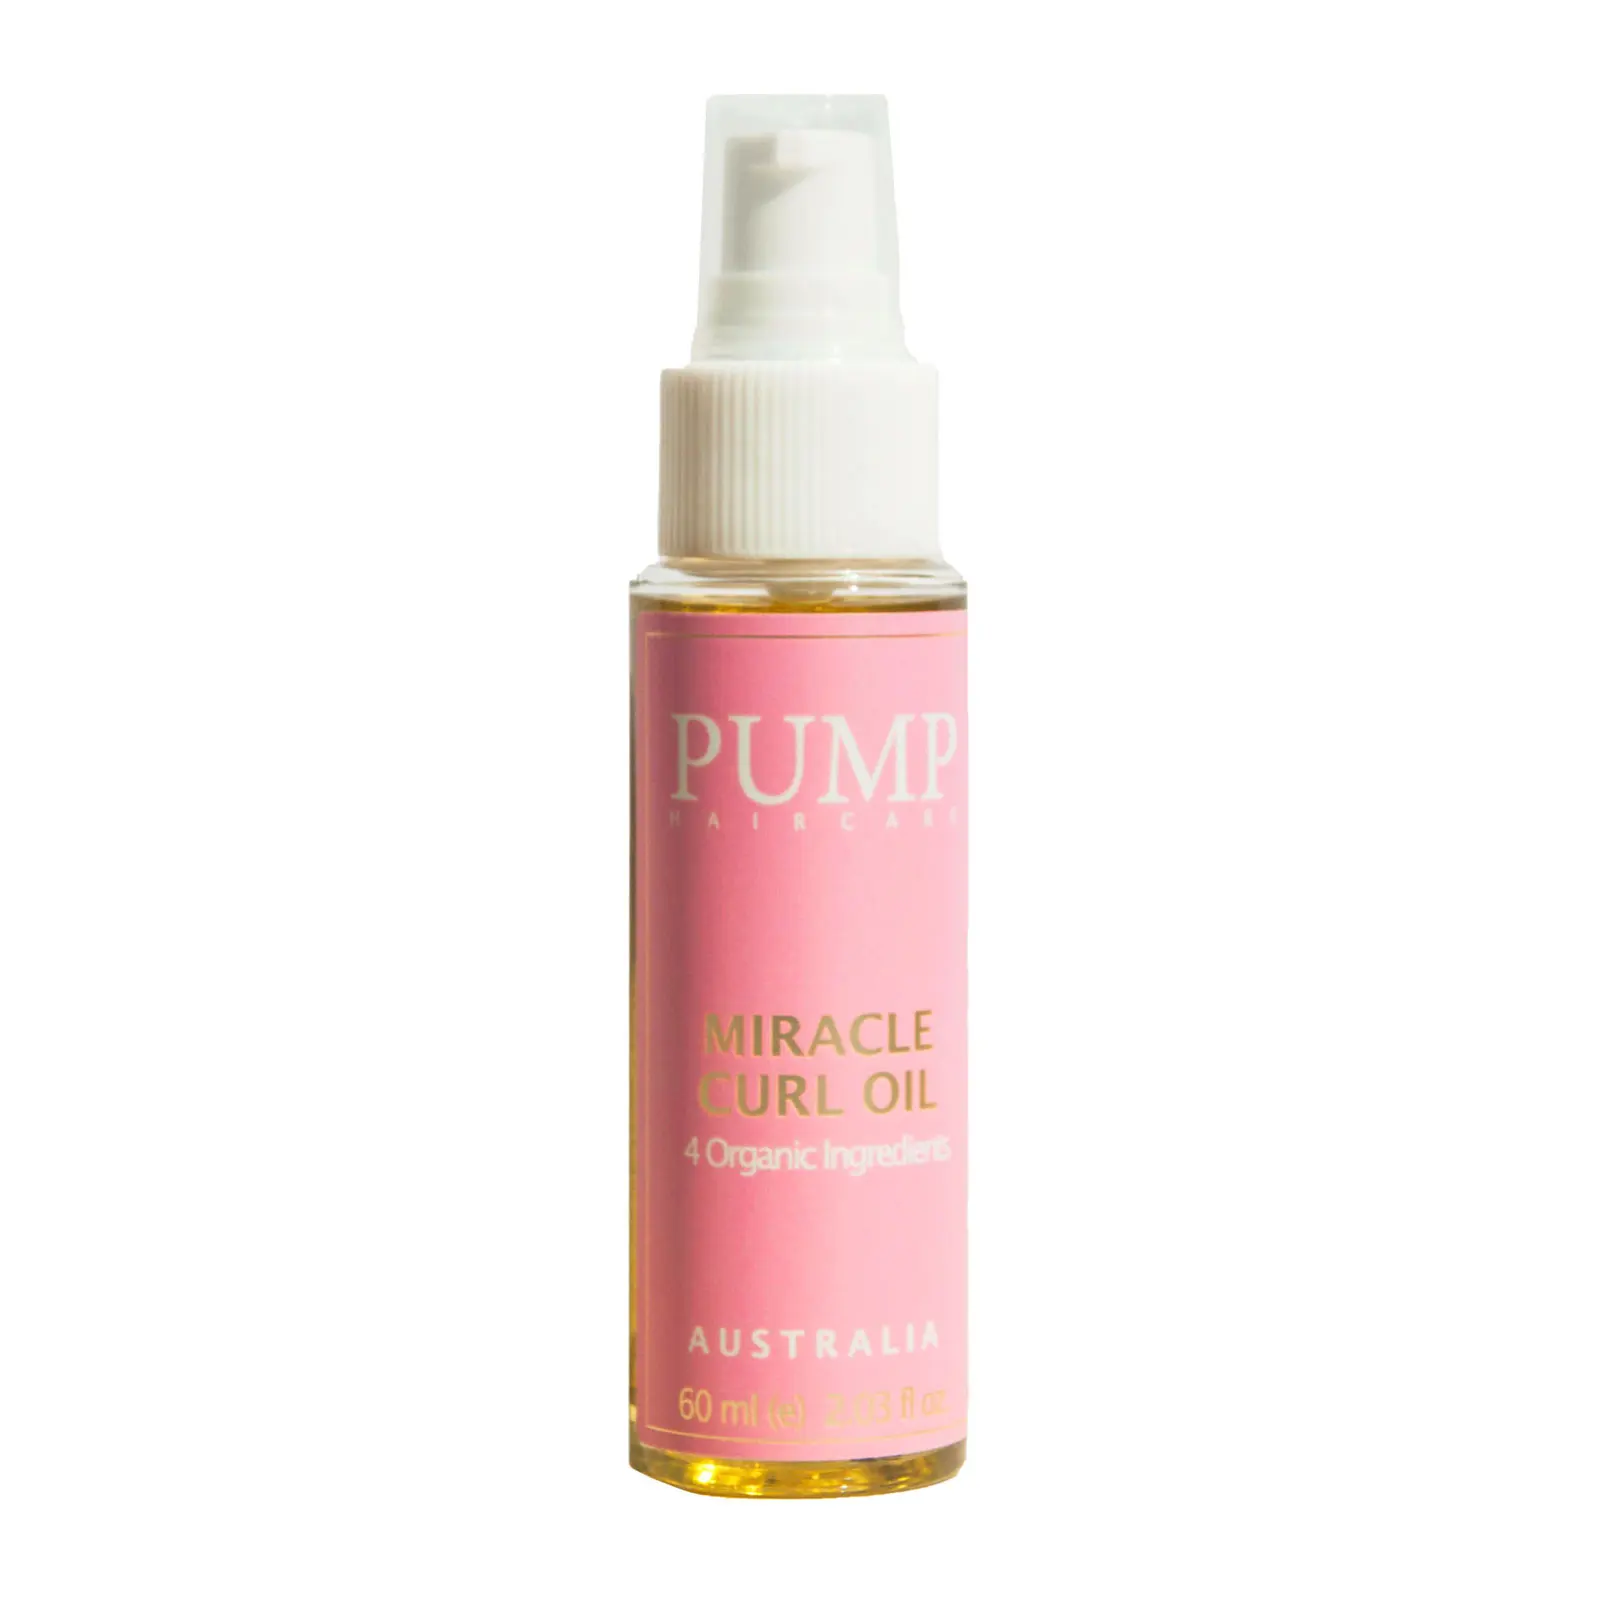 Pump Miracle Curl Oil 60ml Discounts and Cashback